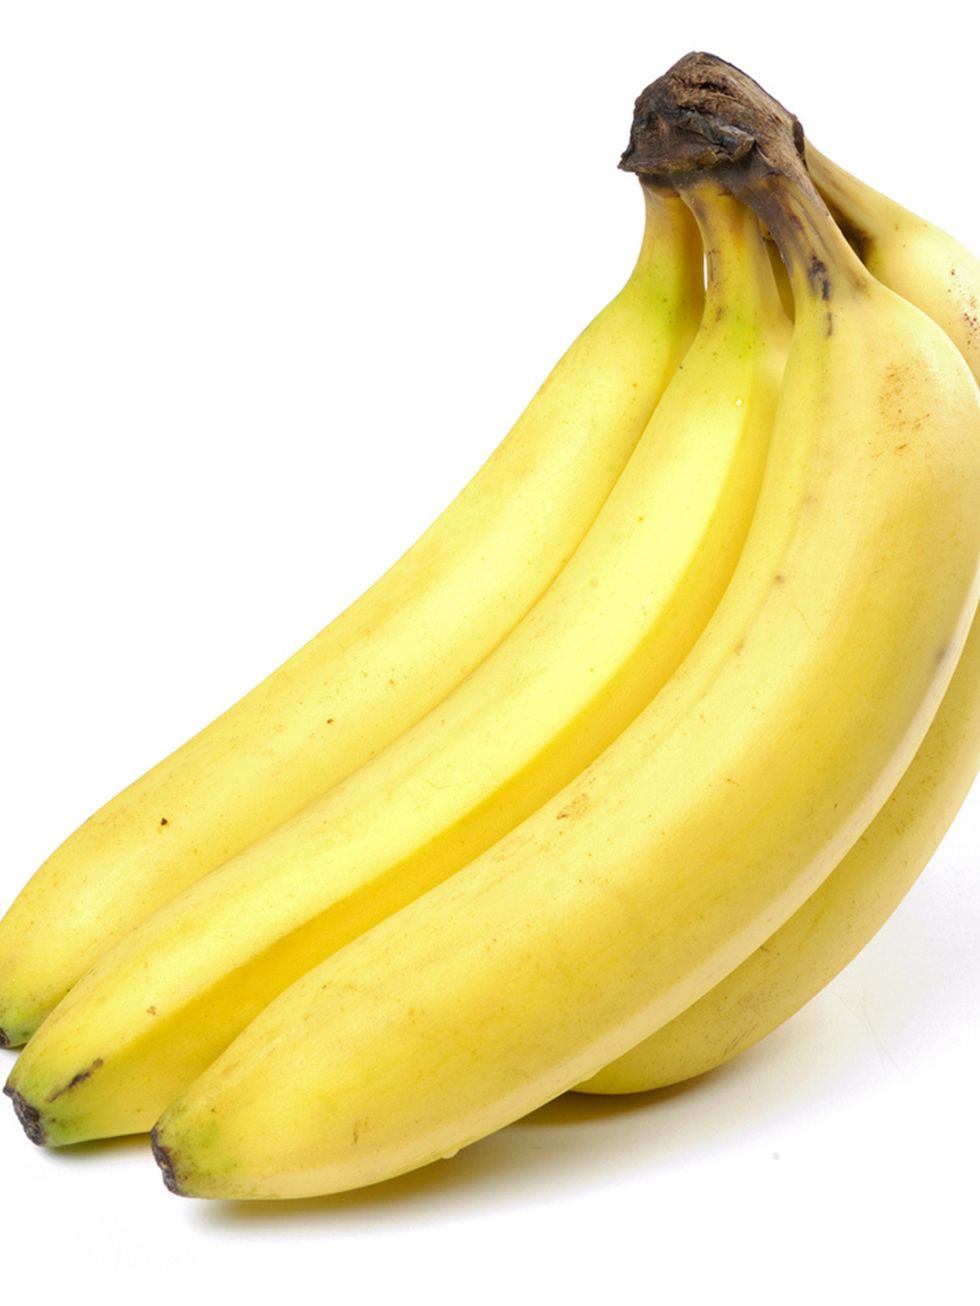 <p>Before: Bananas</p>

<p>You'll be tempted to not eat before you workout, but you need to fuel your tank to avoid burning out your engine. Think of banana's as natures power bar. They're fast acting carbohydrates and are packed with potassium, which hel